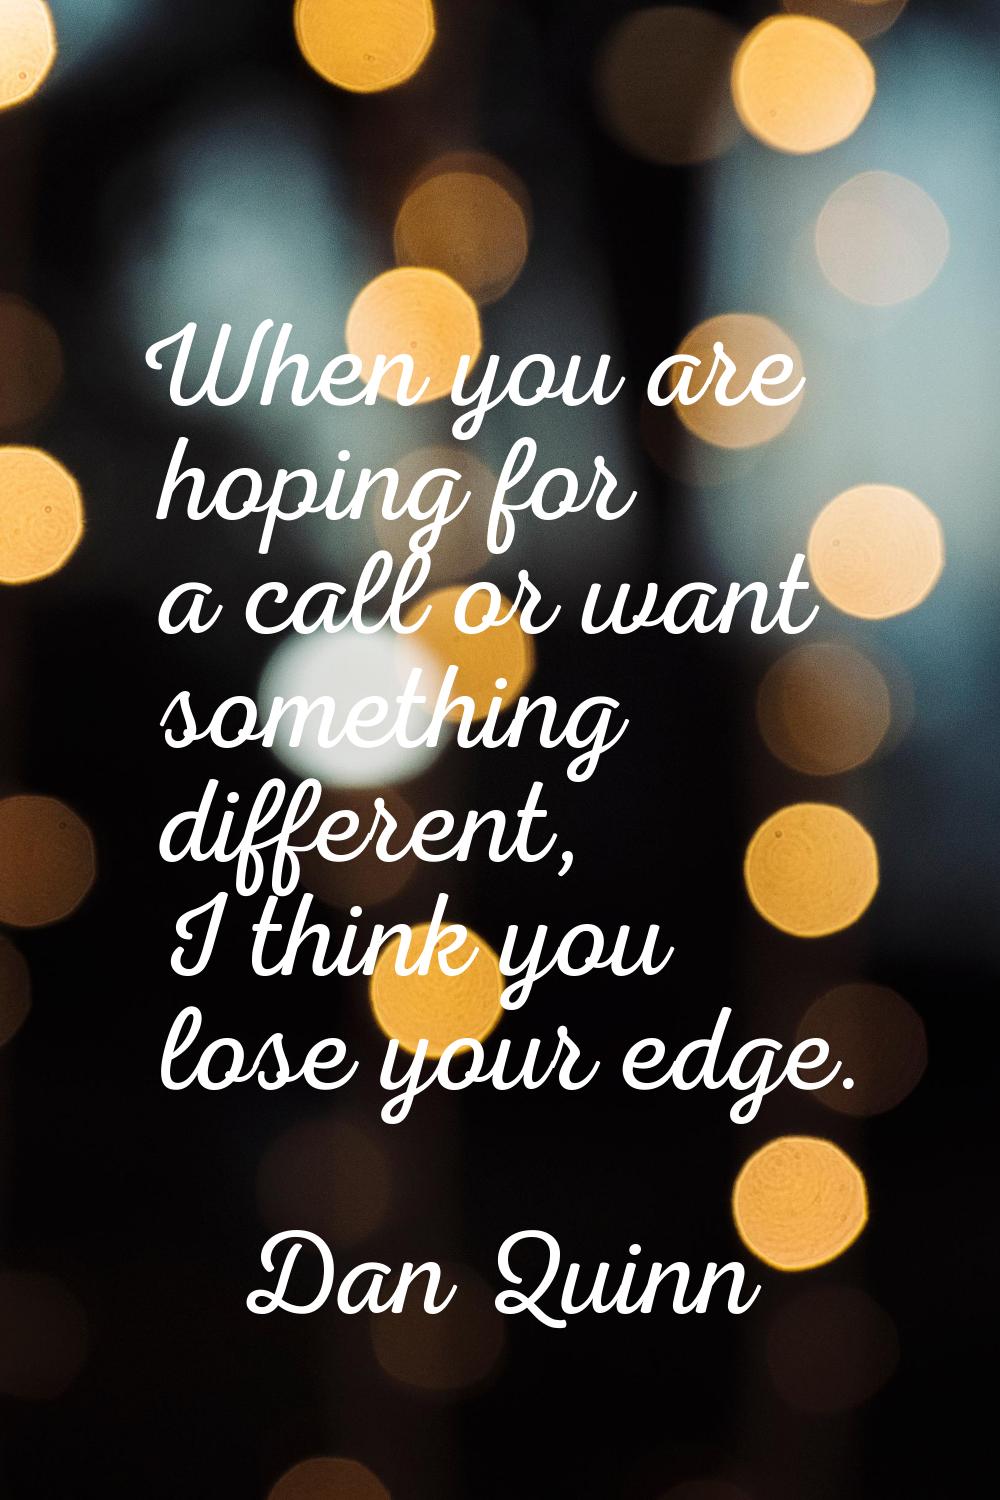 When you are hoping for a call or want something different, I think you lose your edge.